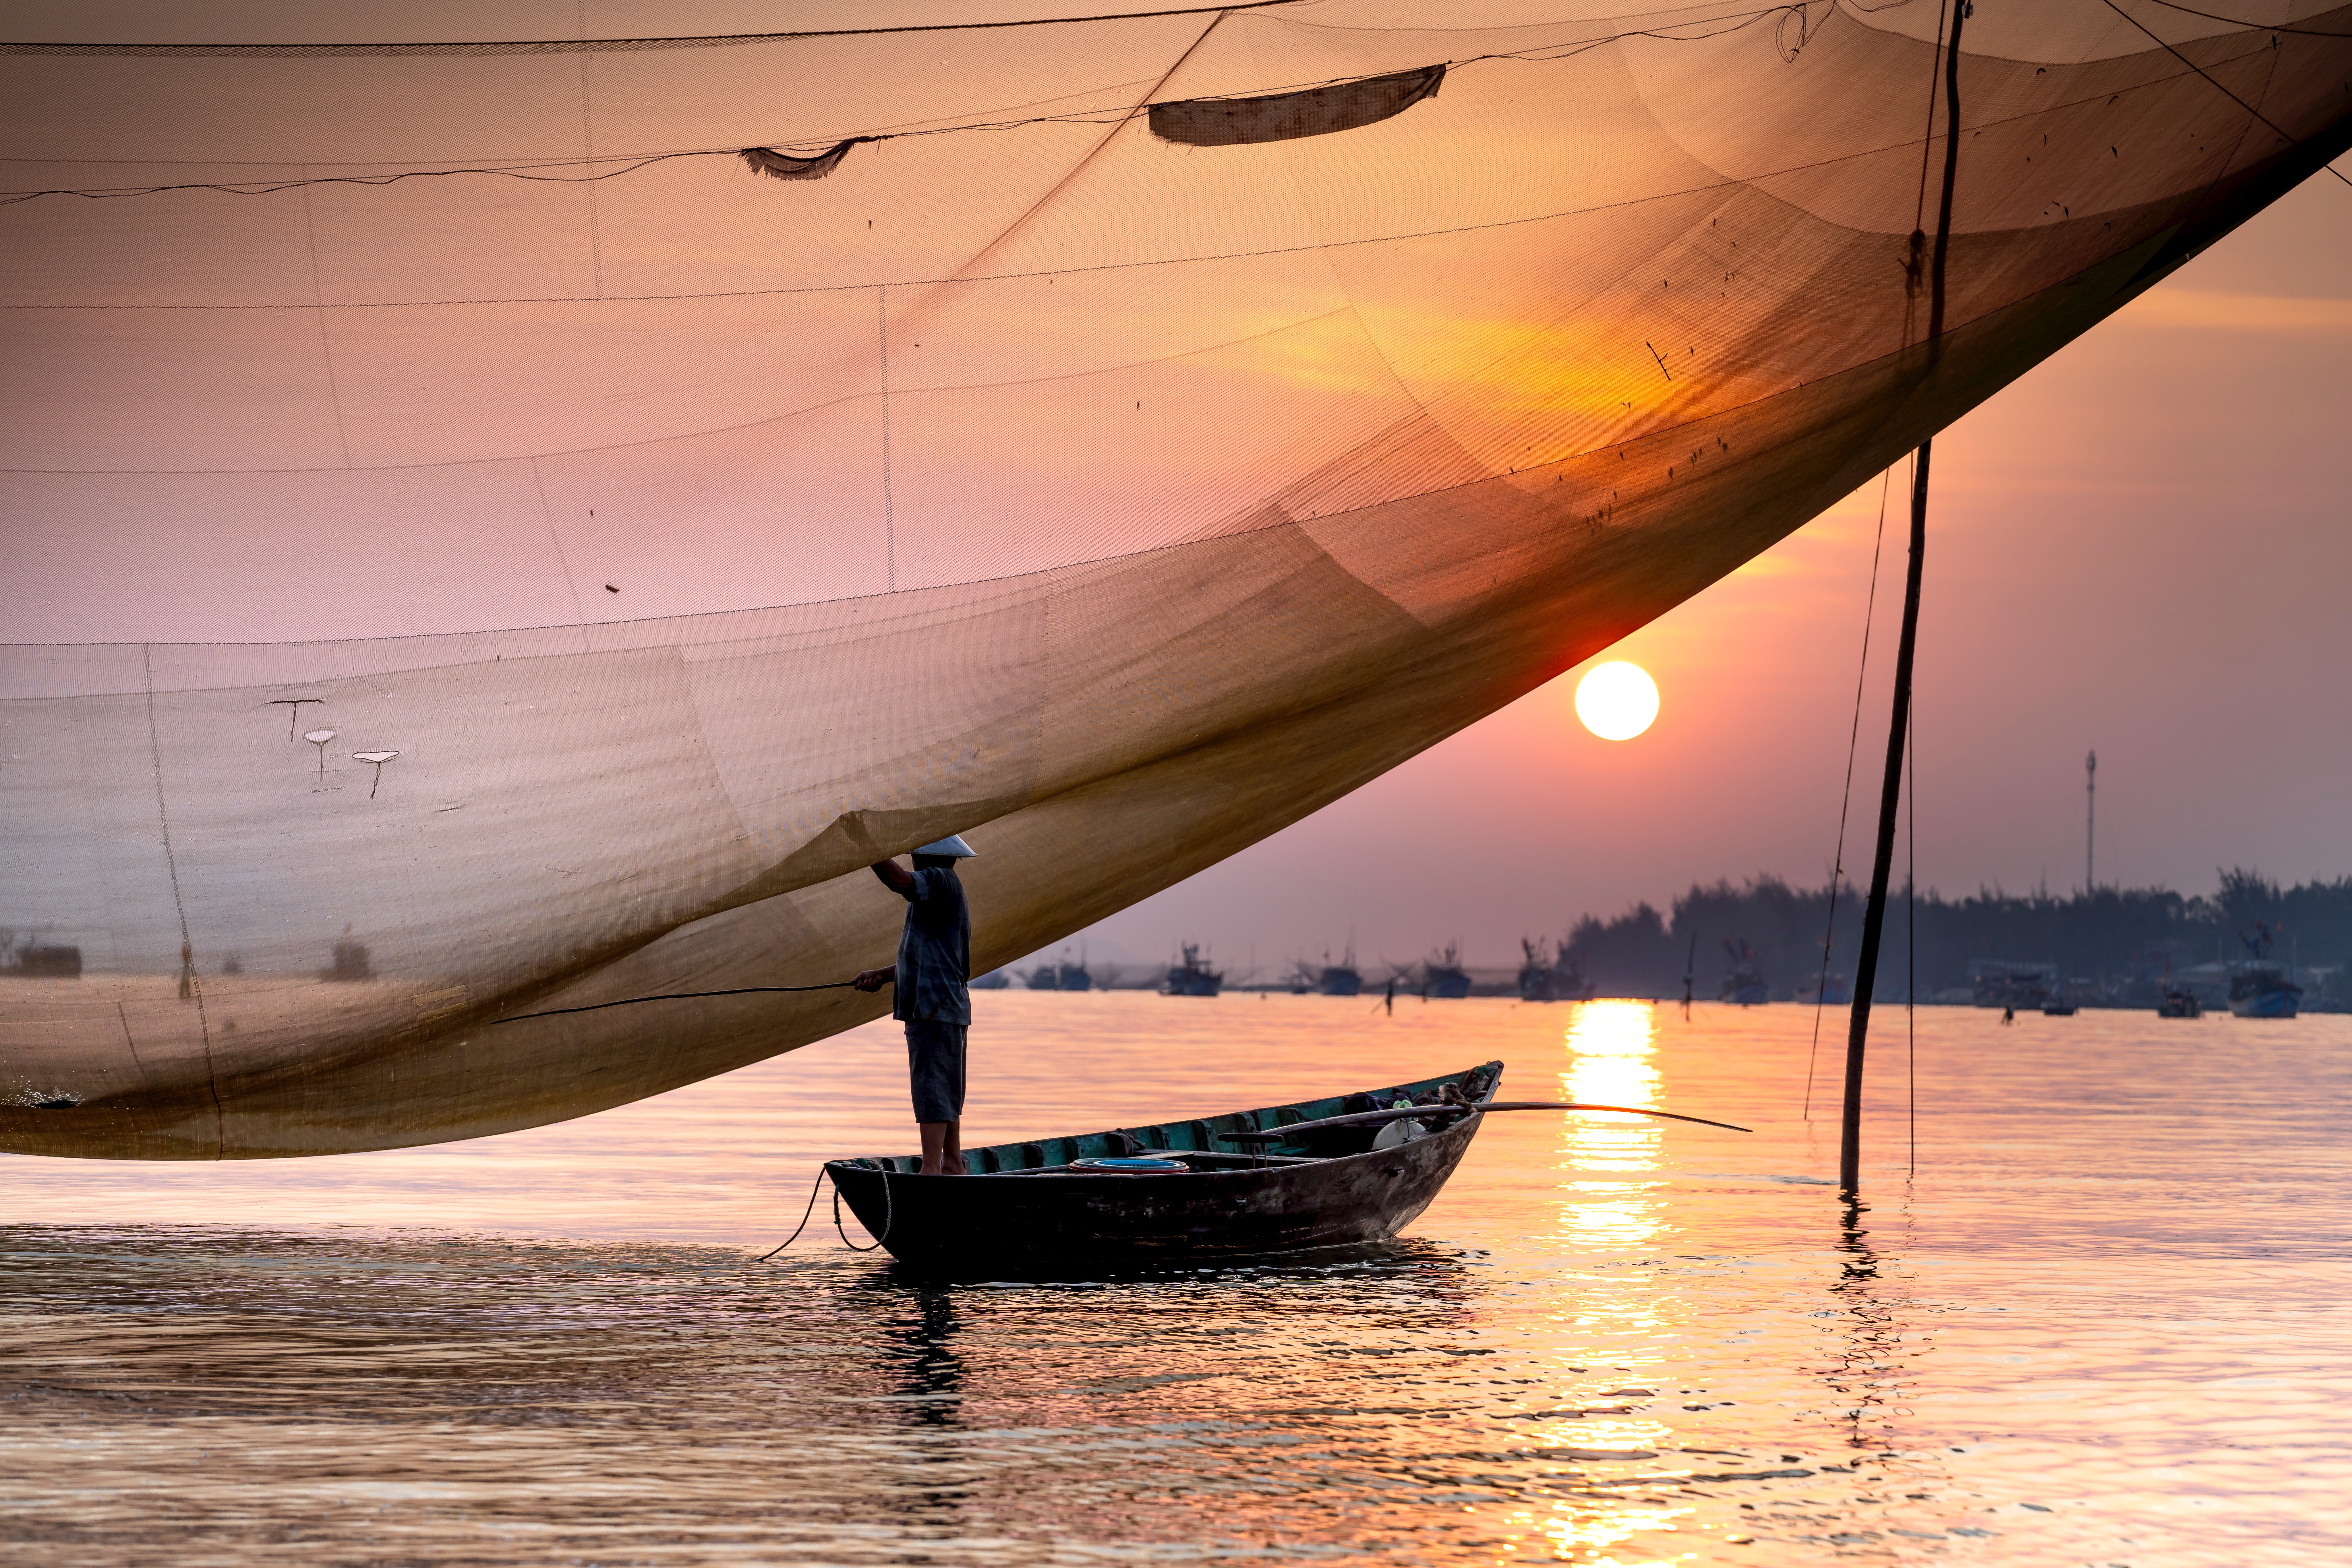 A photo of a fisher under a wide net on the water as the sun sets